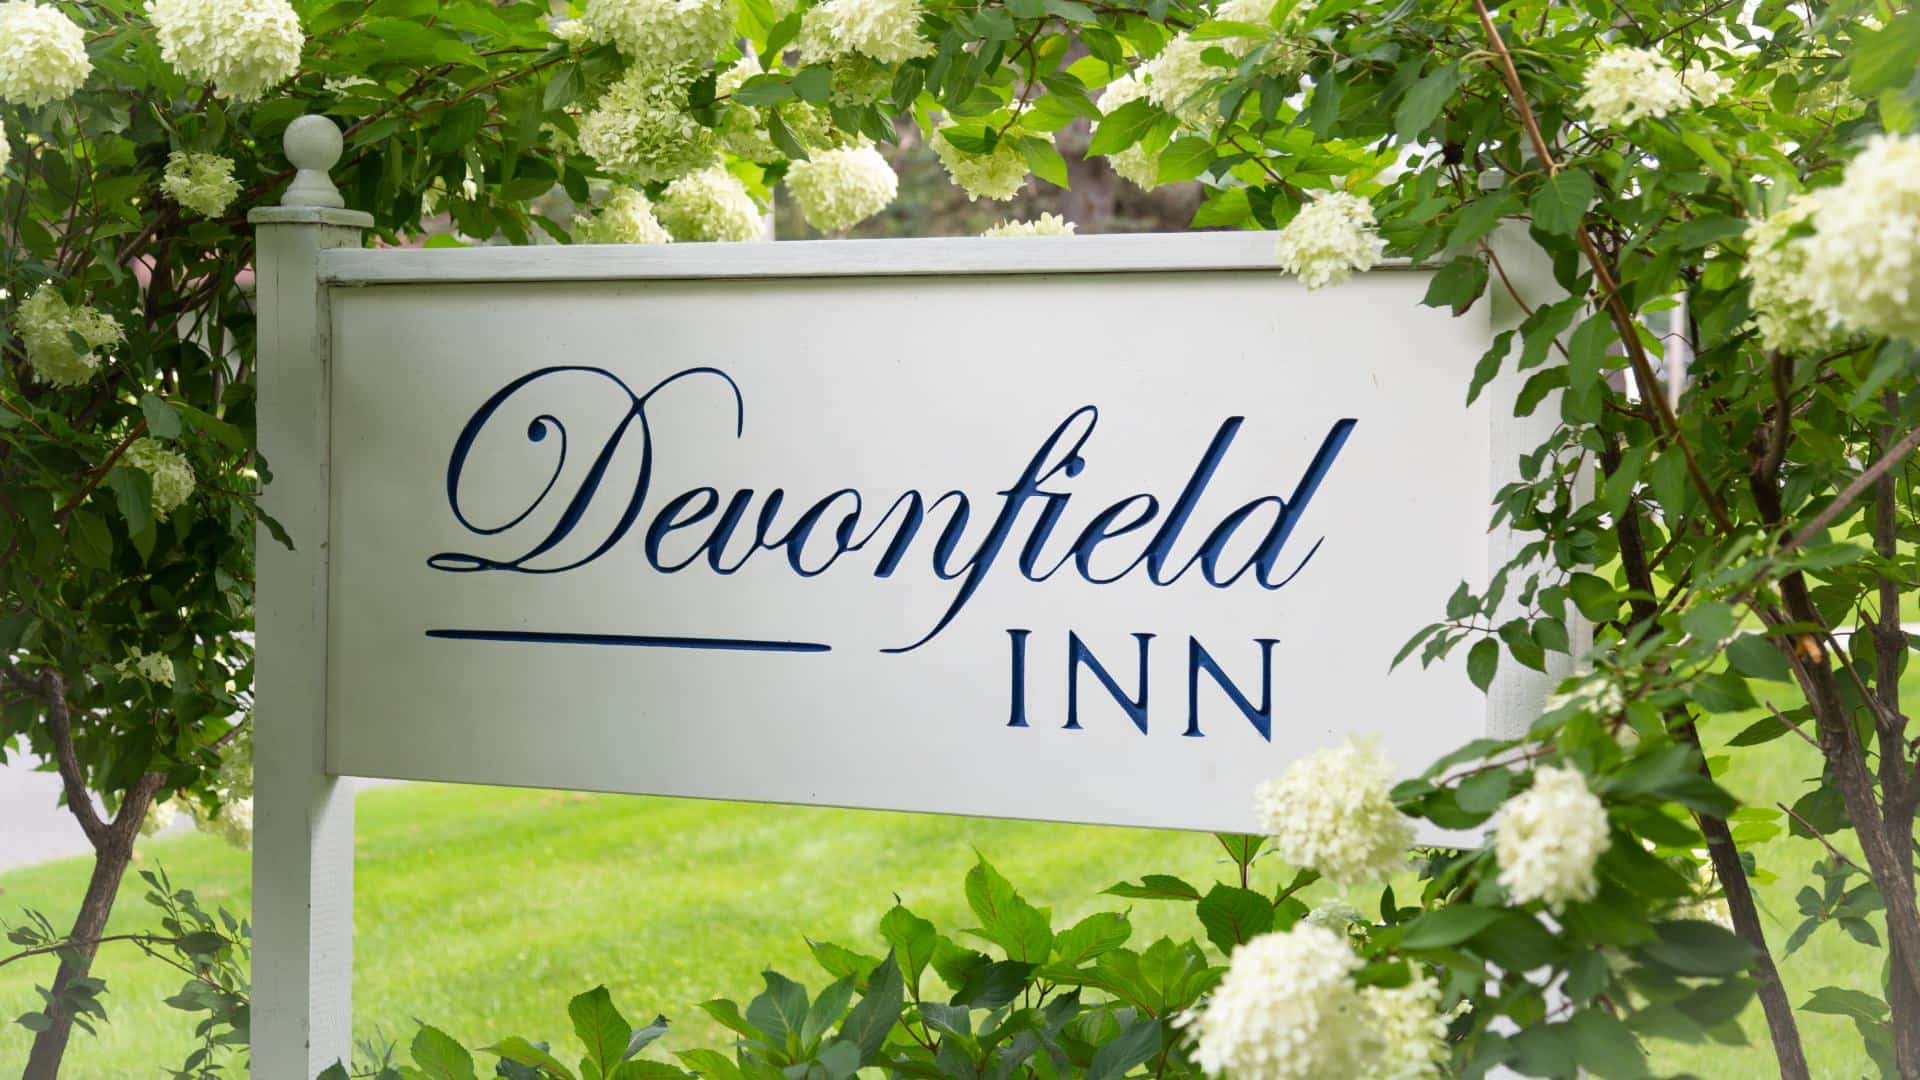 Close up view of a sign showing Devonfield Inn surrounded by white flowers